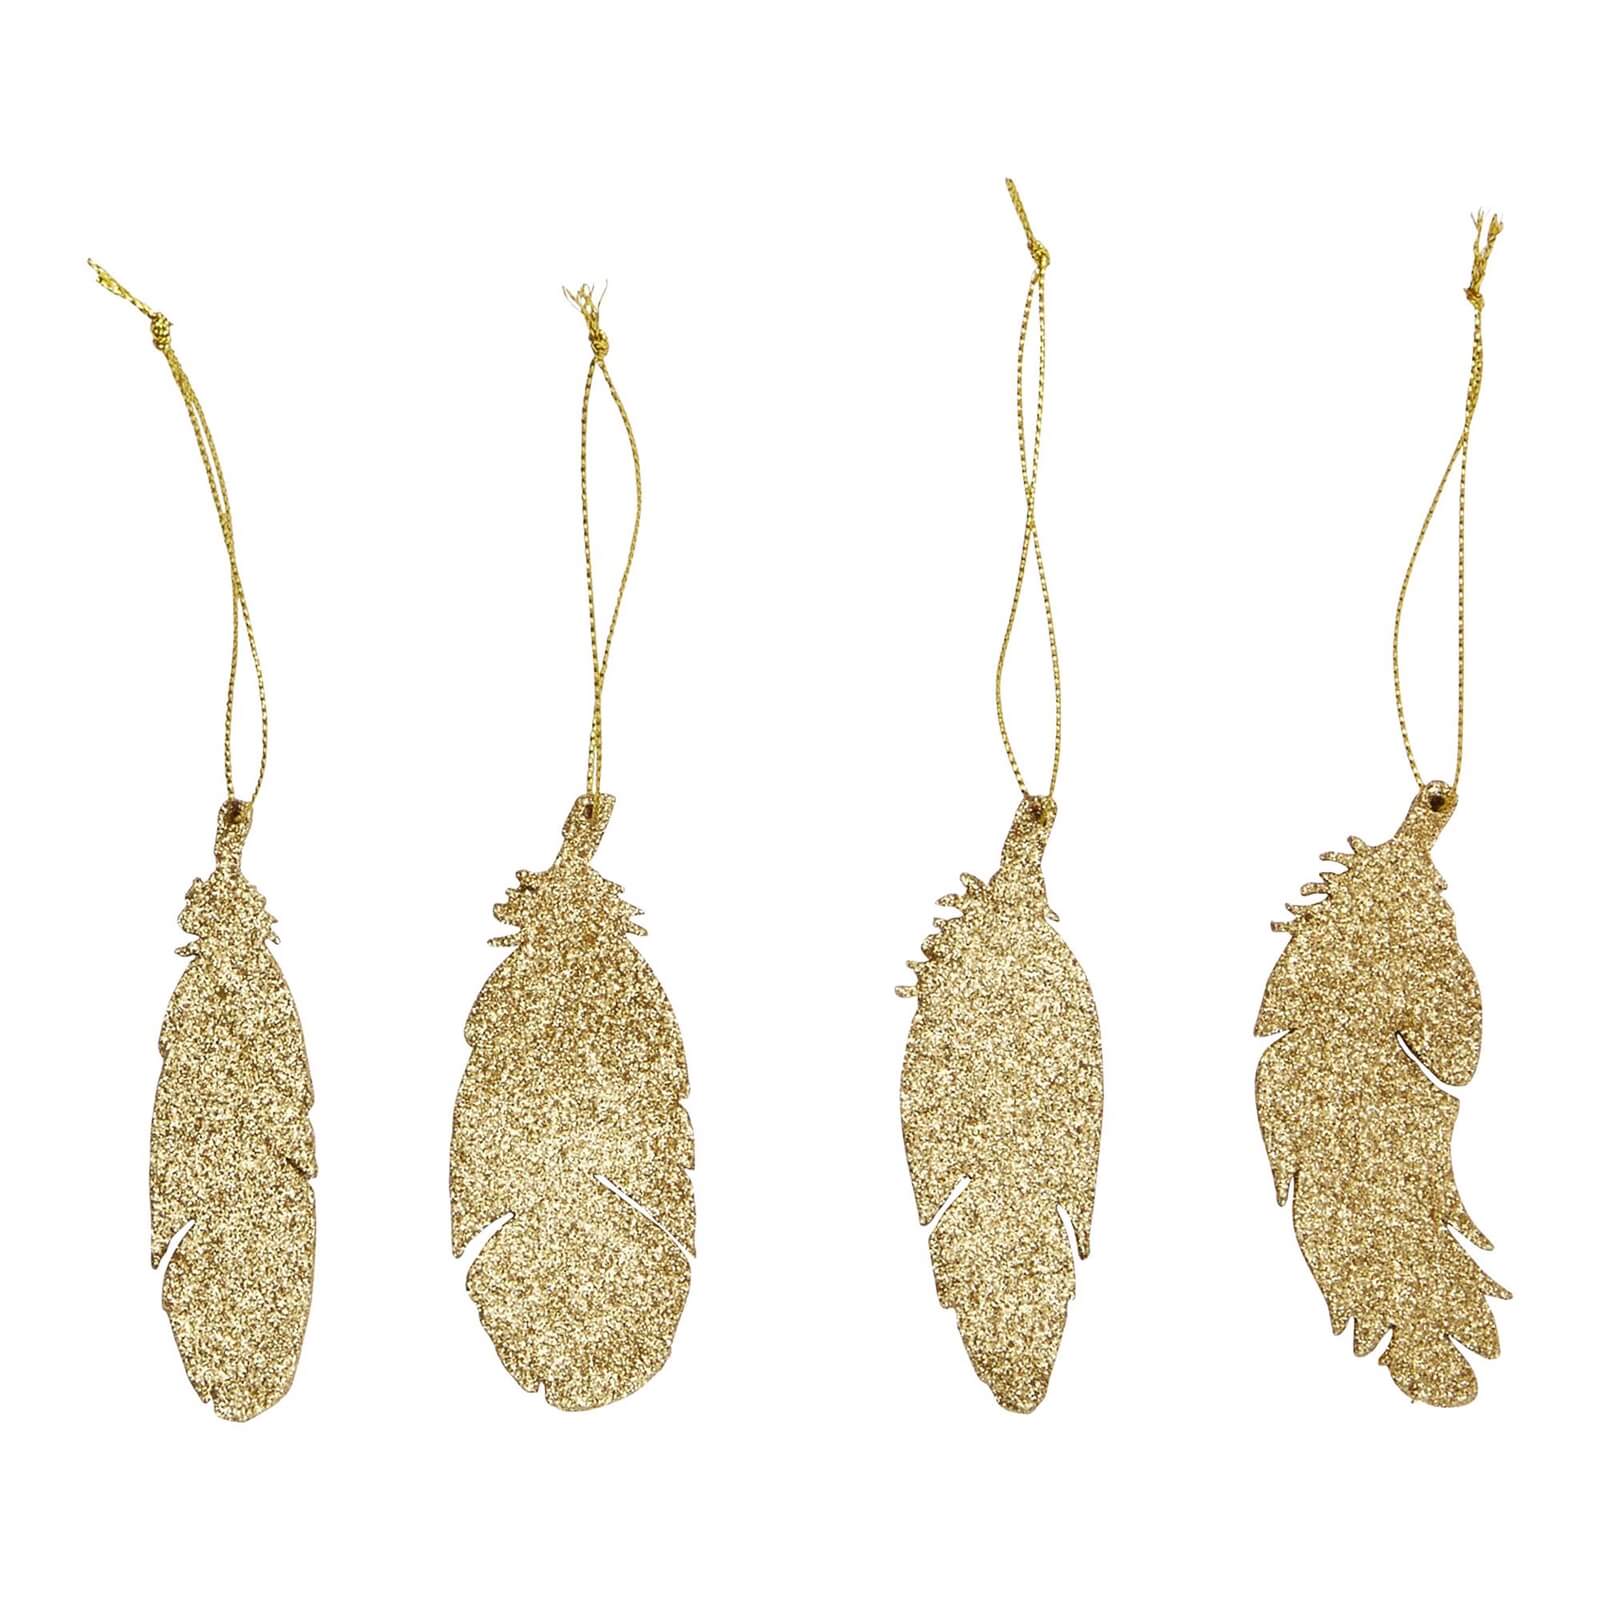 Gold Glitter Feather Christmas Tree Decorations - Pack of 20